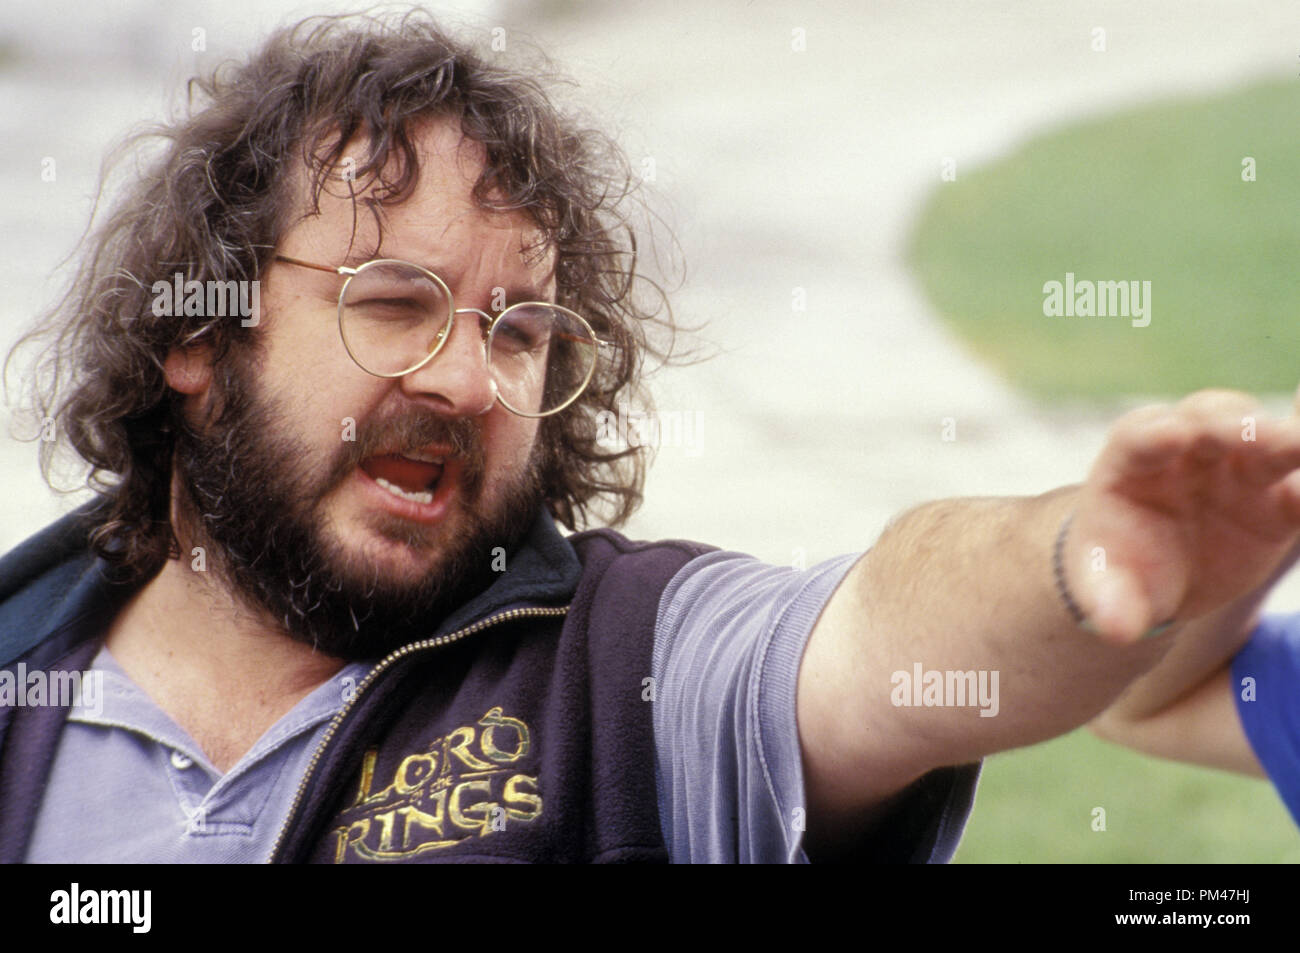 Newline Pictures Presents 'Lord of the Rings: The Return of the King' Dir. Peter Jackson © 2003 New Line Stock Photo